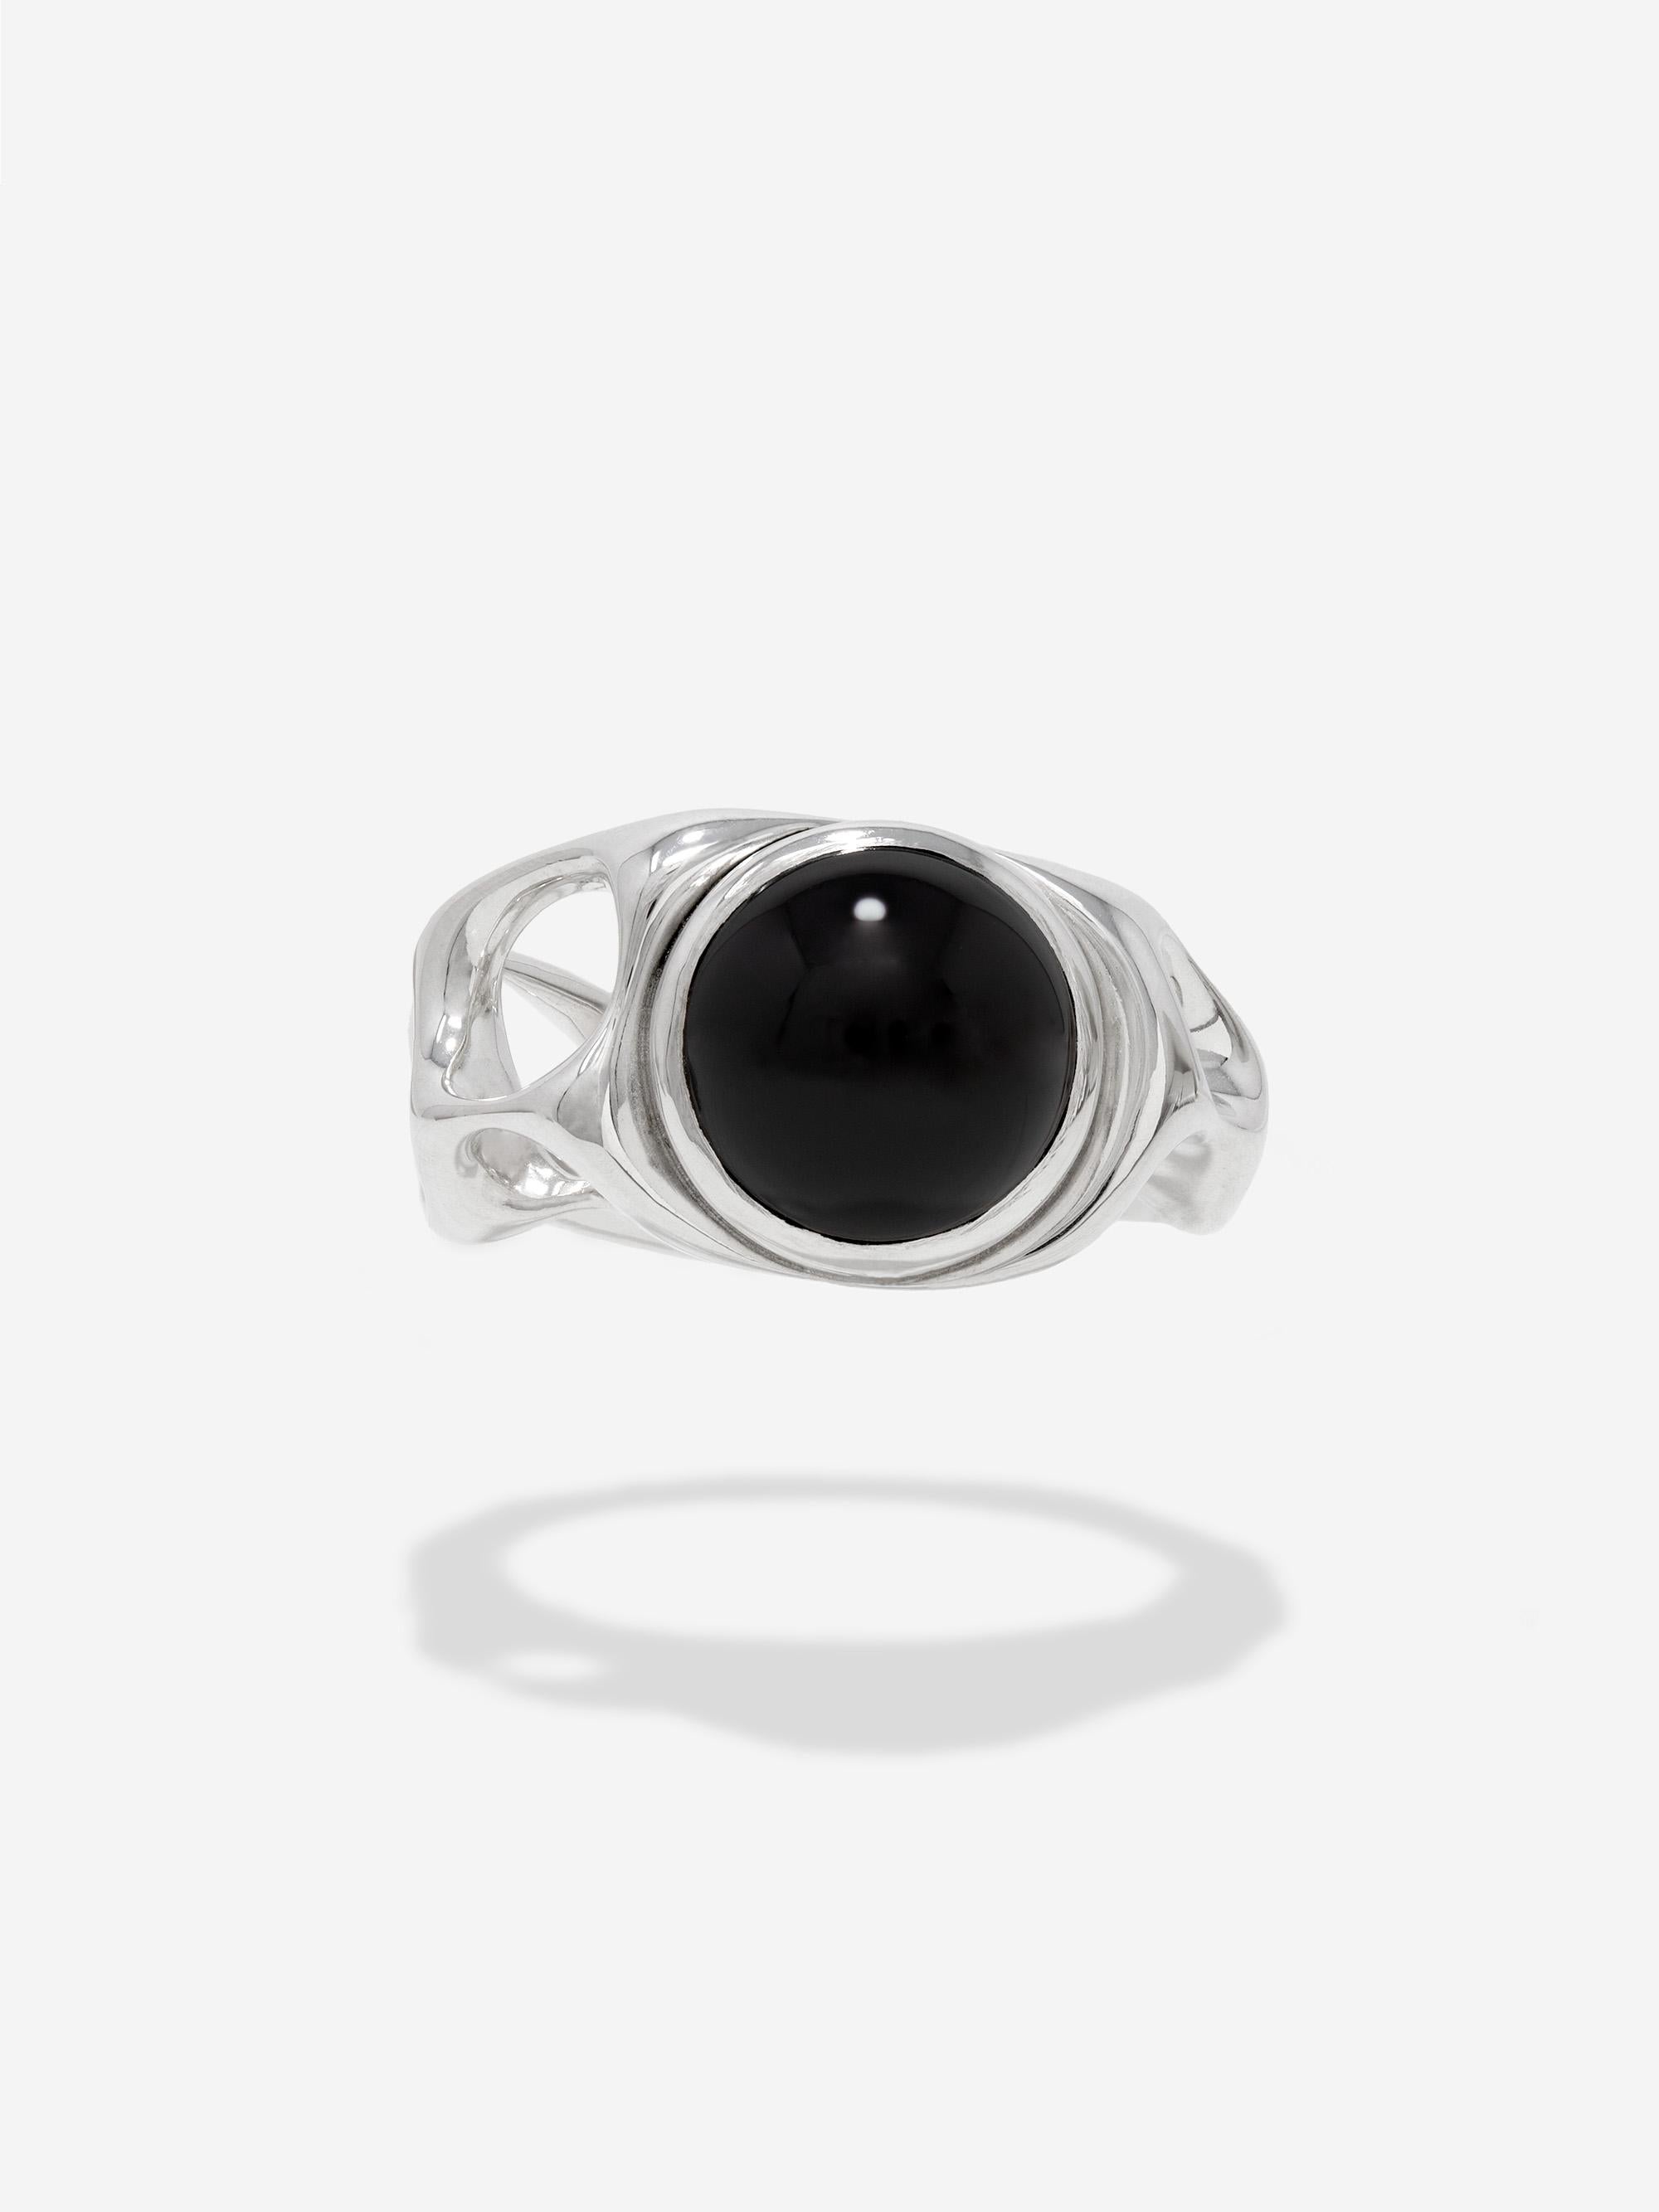 CAPTIVE- The Onyx Horizon ring is an ode to celestial giants, frozen in their collapse. A 10mm black onyx cabochon is set into hand carved sterling silver massed ring.